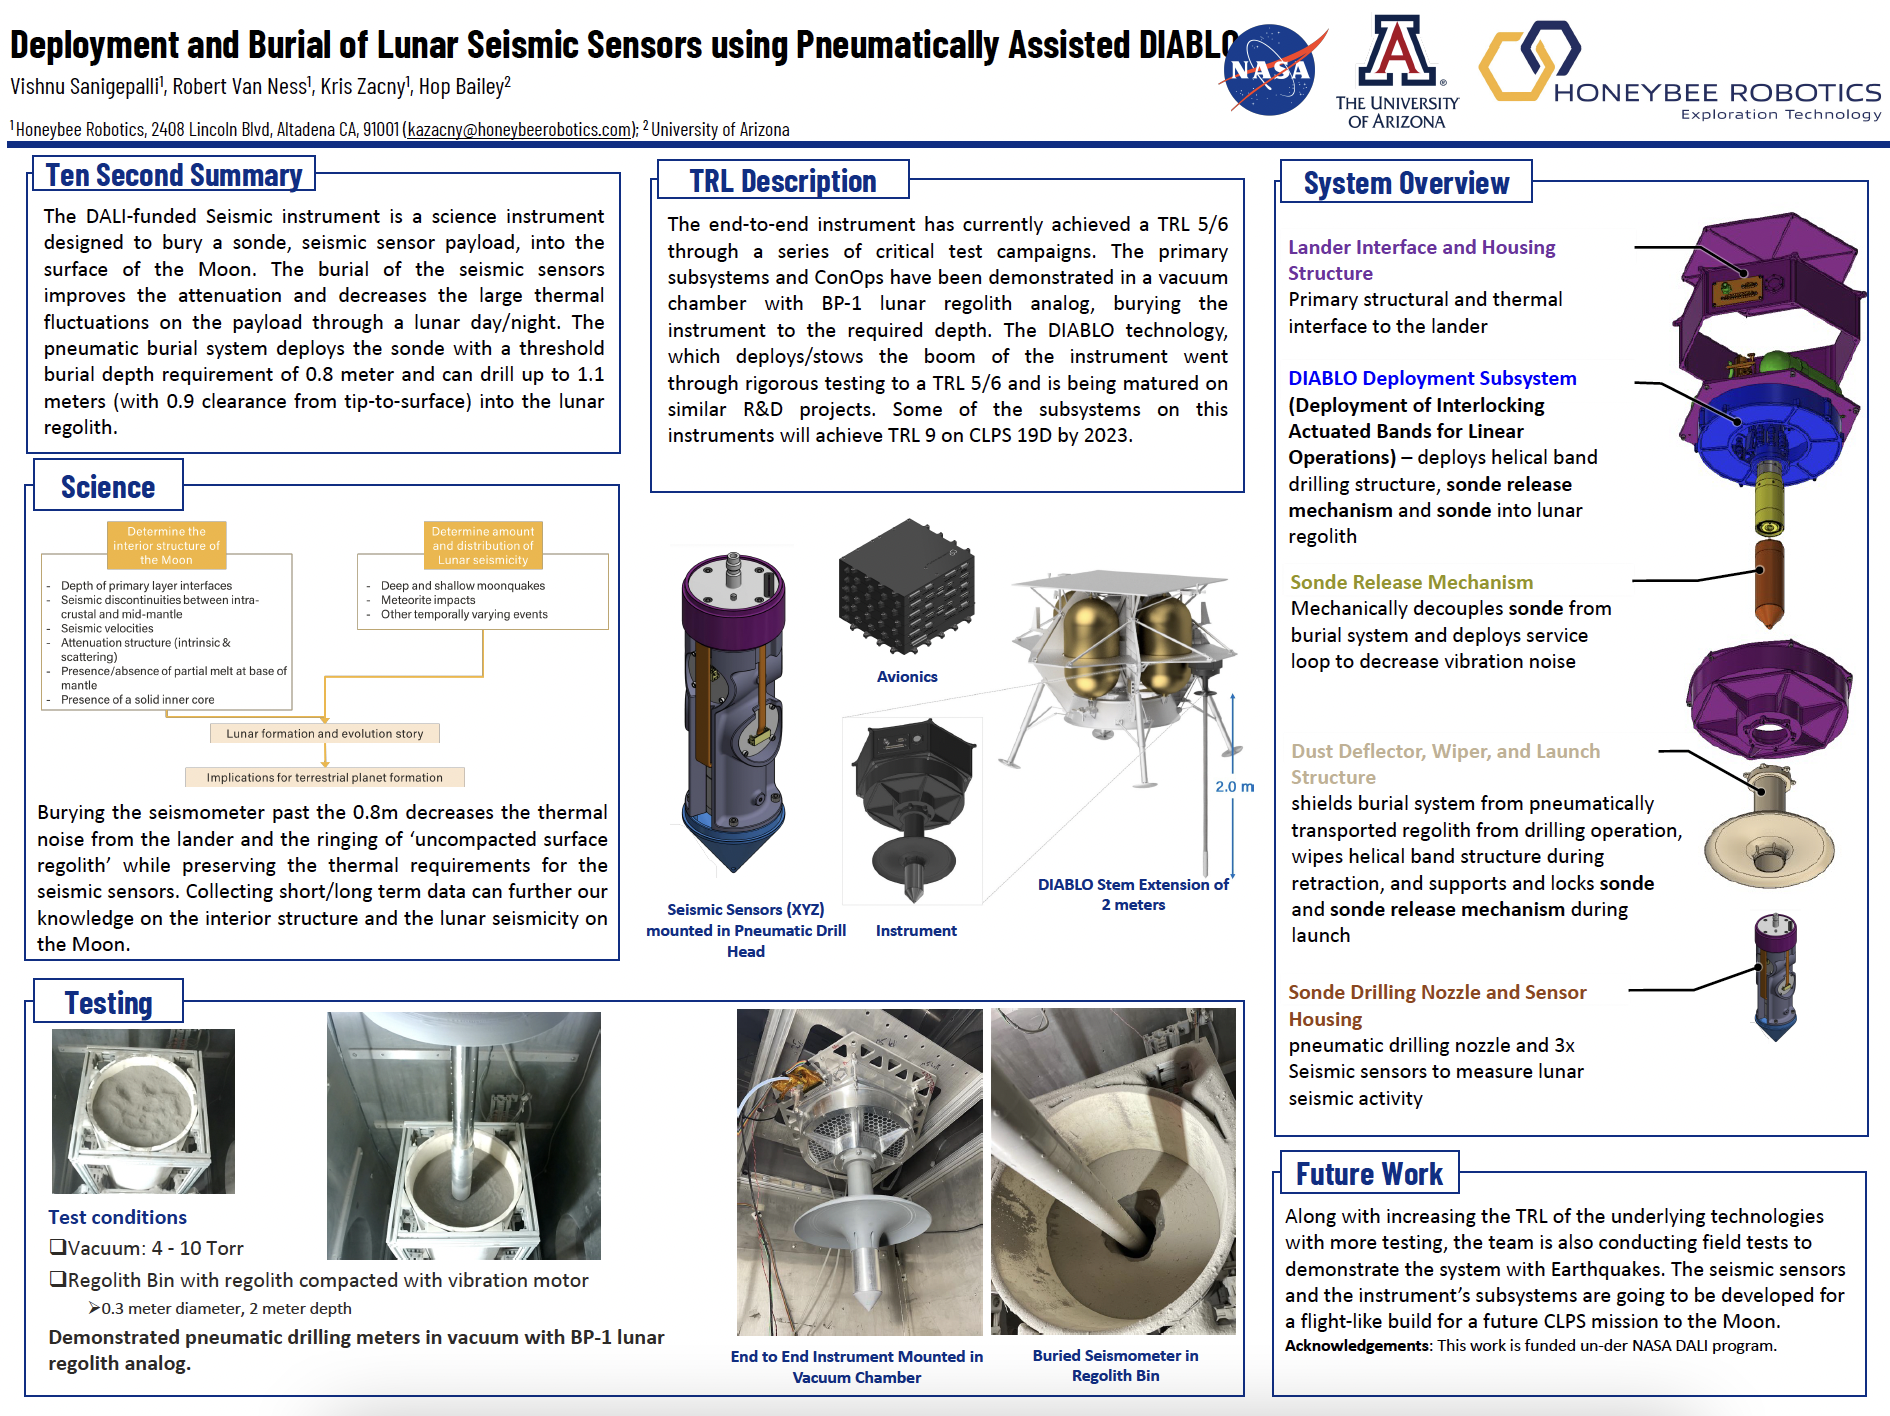 Deployment and Burial of Lunar Seismic Sensors using Pneumatically Assisted DIABLO